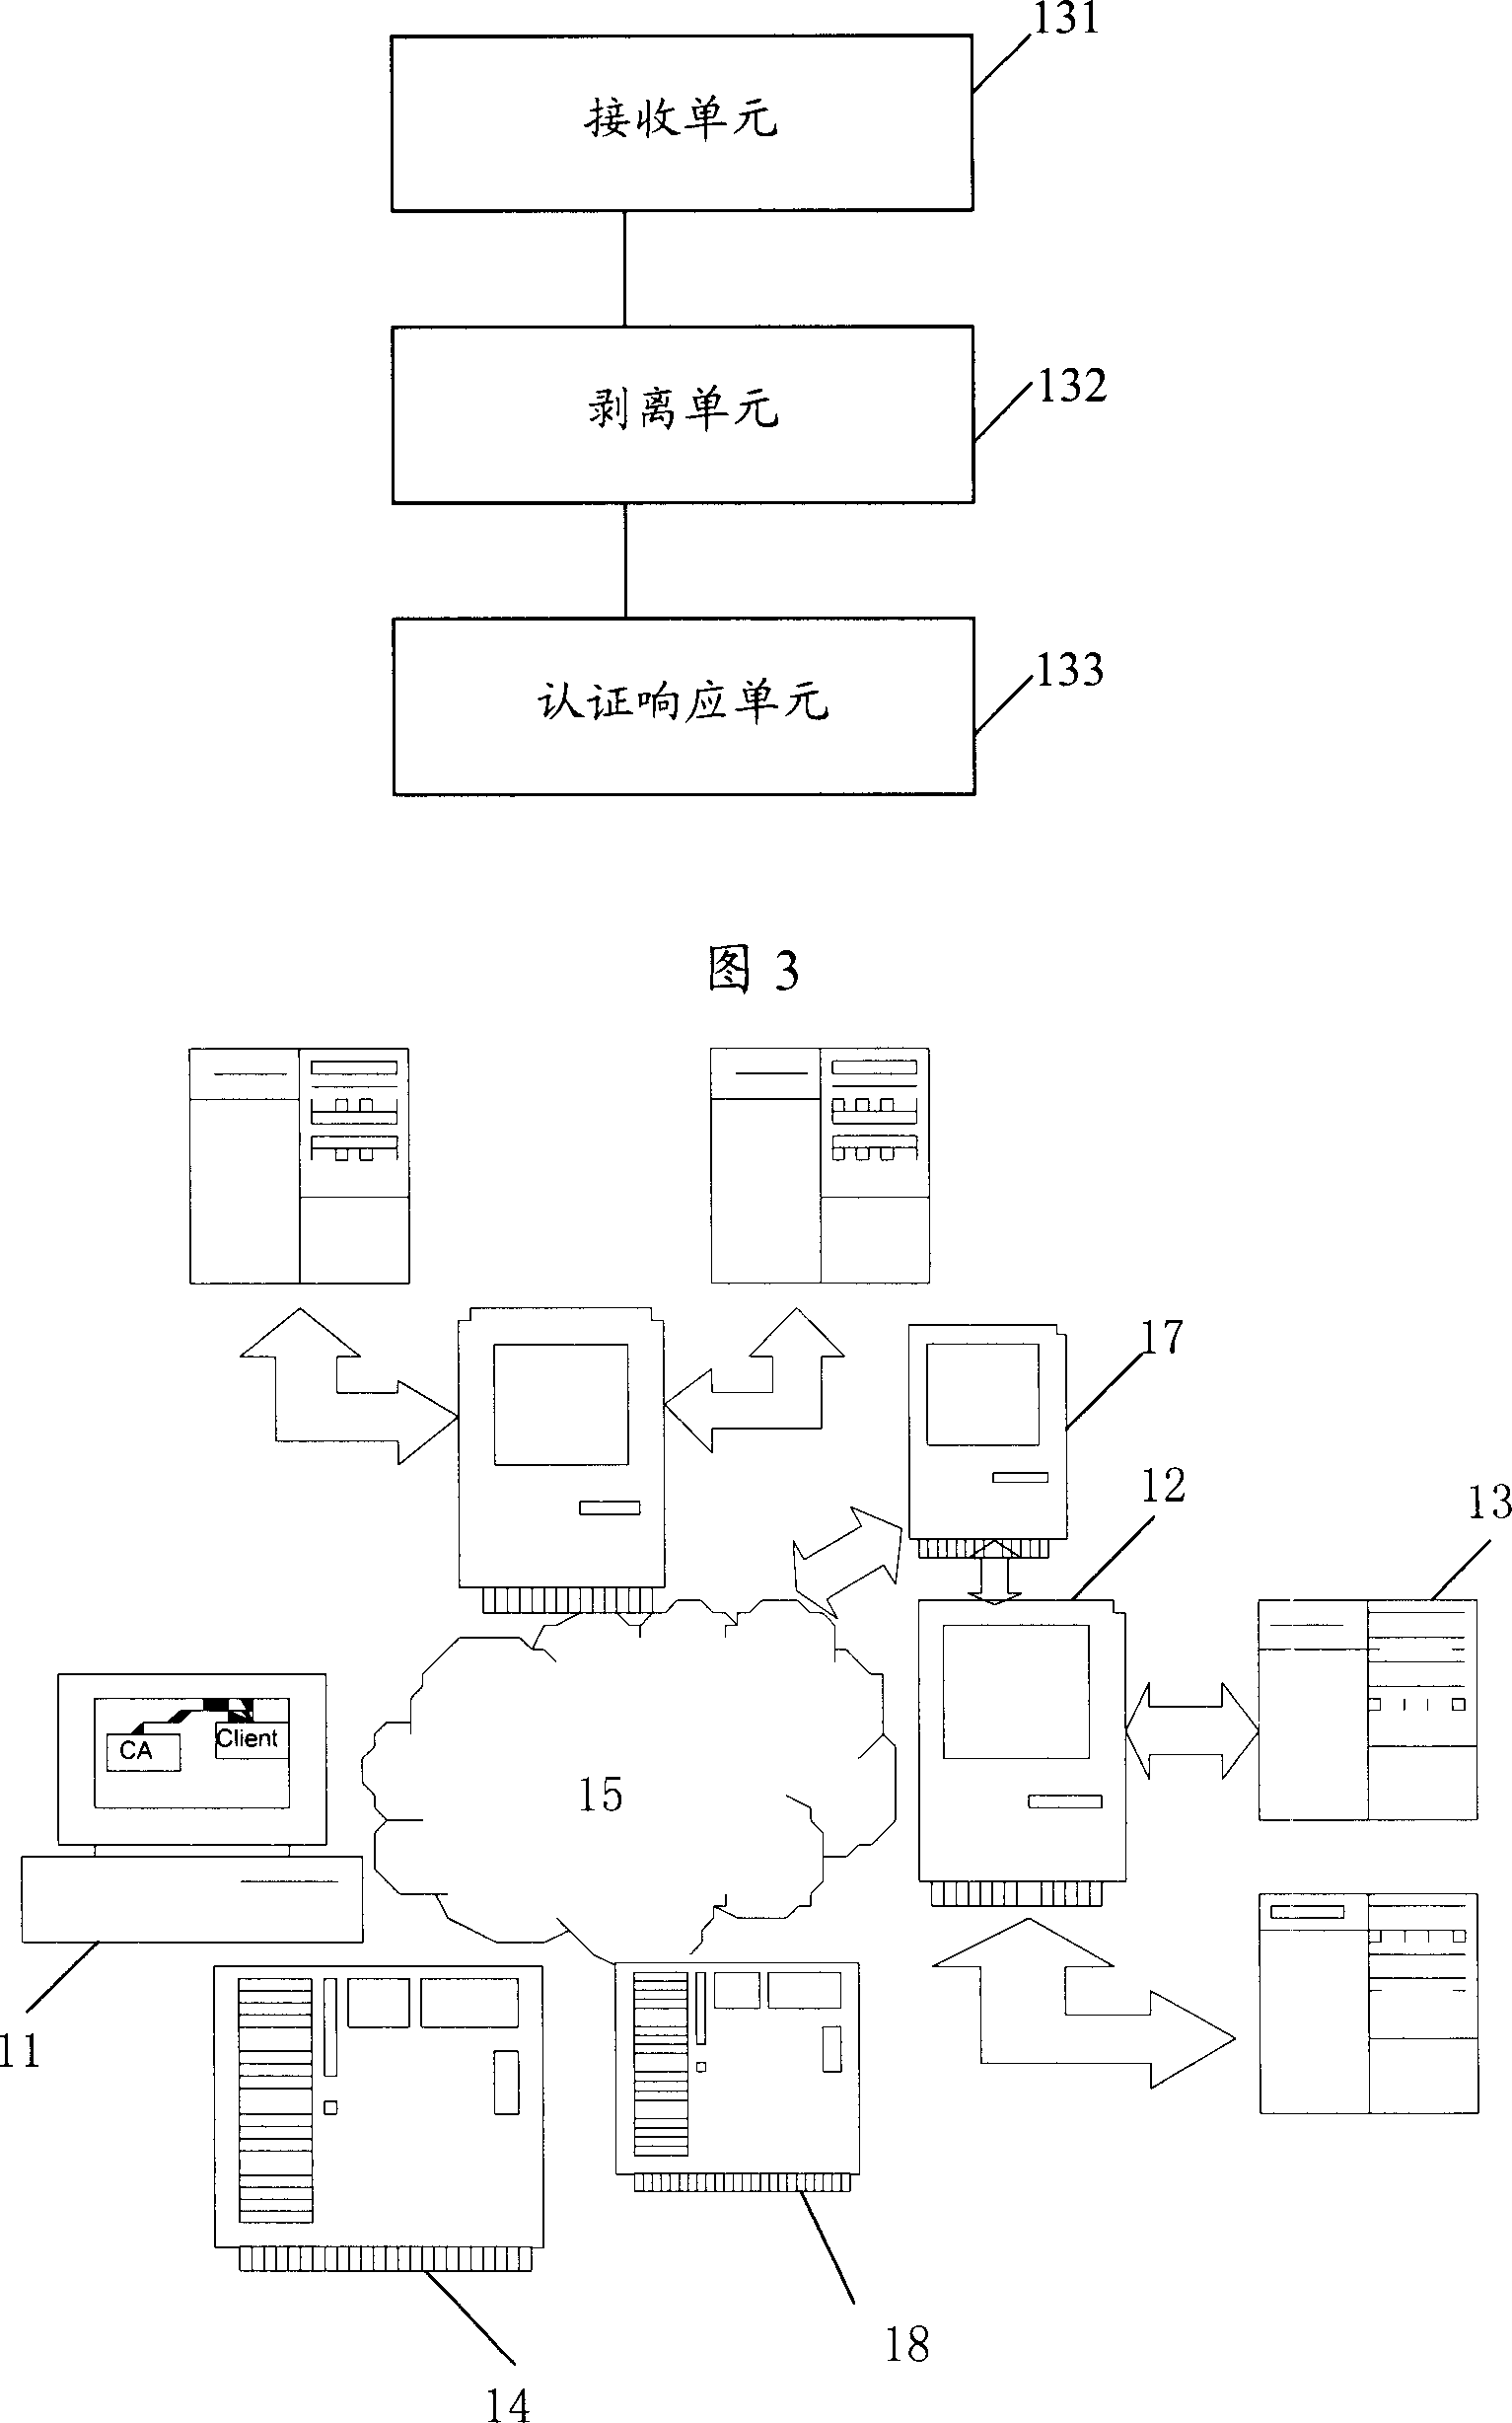 Content supply system based authentication system and method